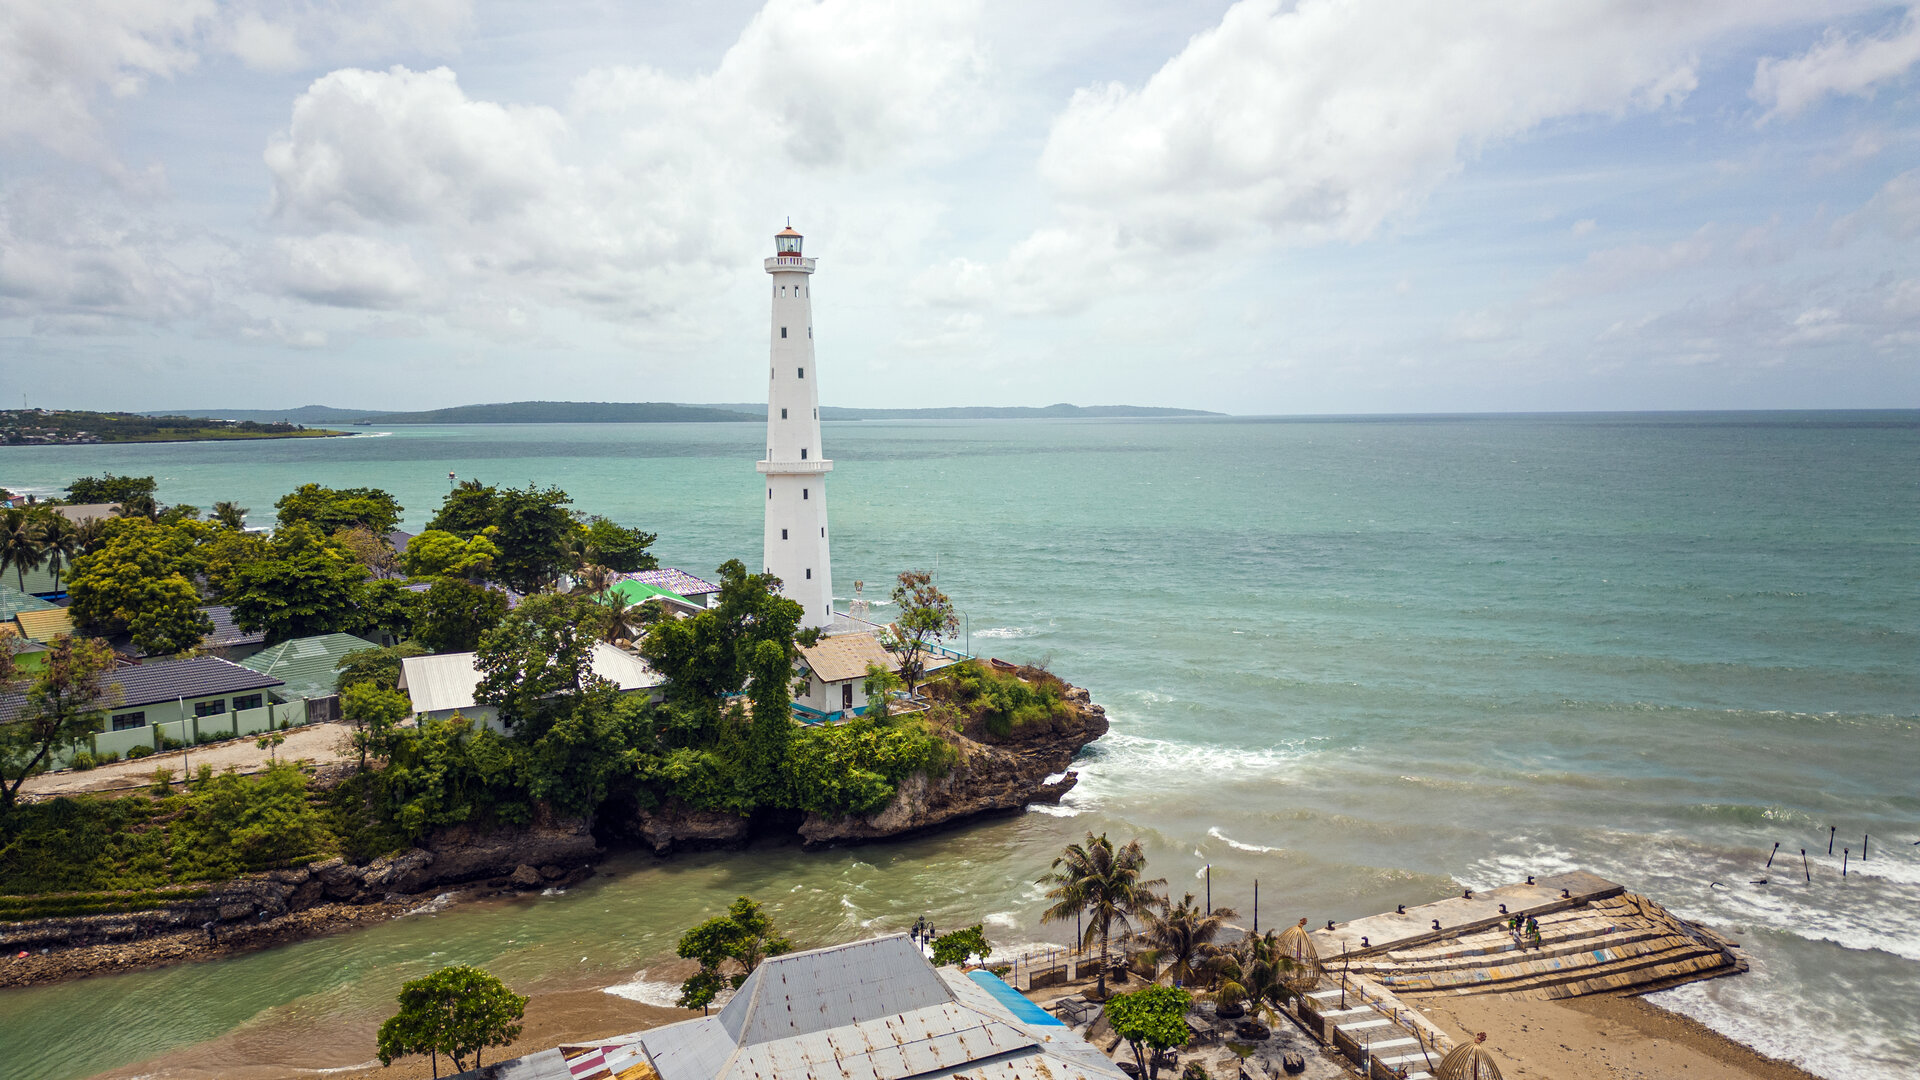 The Kupang Lighthouse, an historical landmark from the colonial past. The Dutch name for it is Ruïnes van de Oude Indië Pier in Koepang